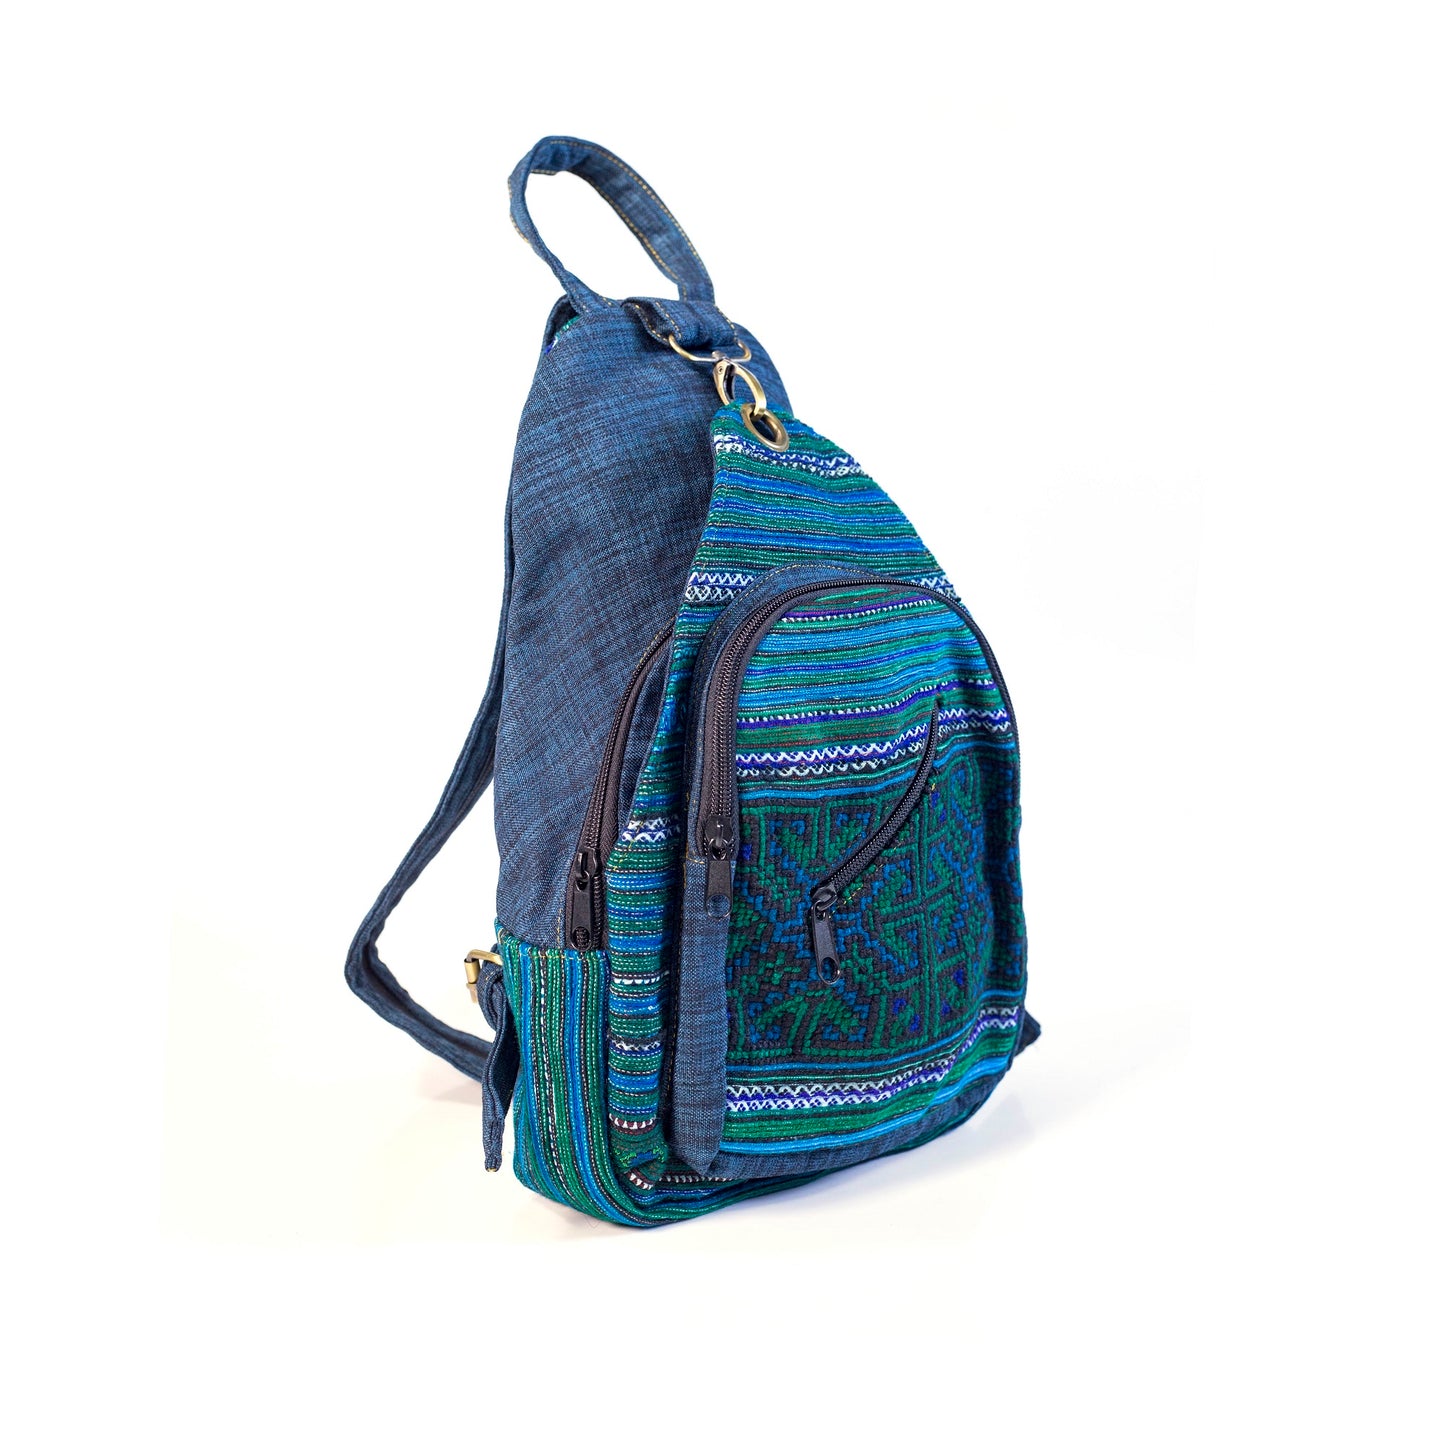 Multi-purpose backpack and sling, blue hand-embroidery fabric, dark blue trim